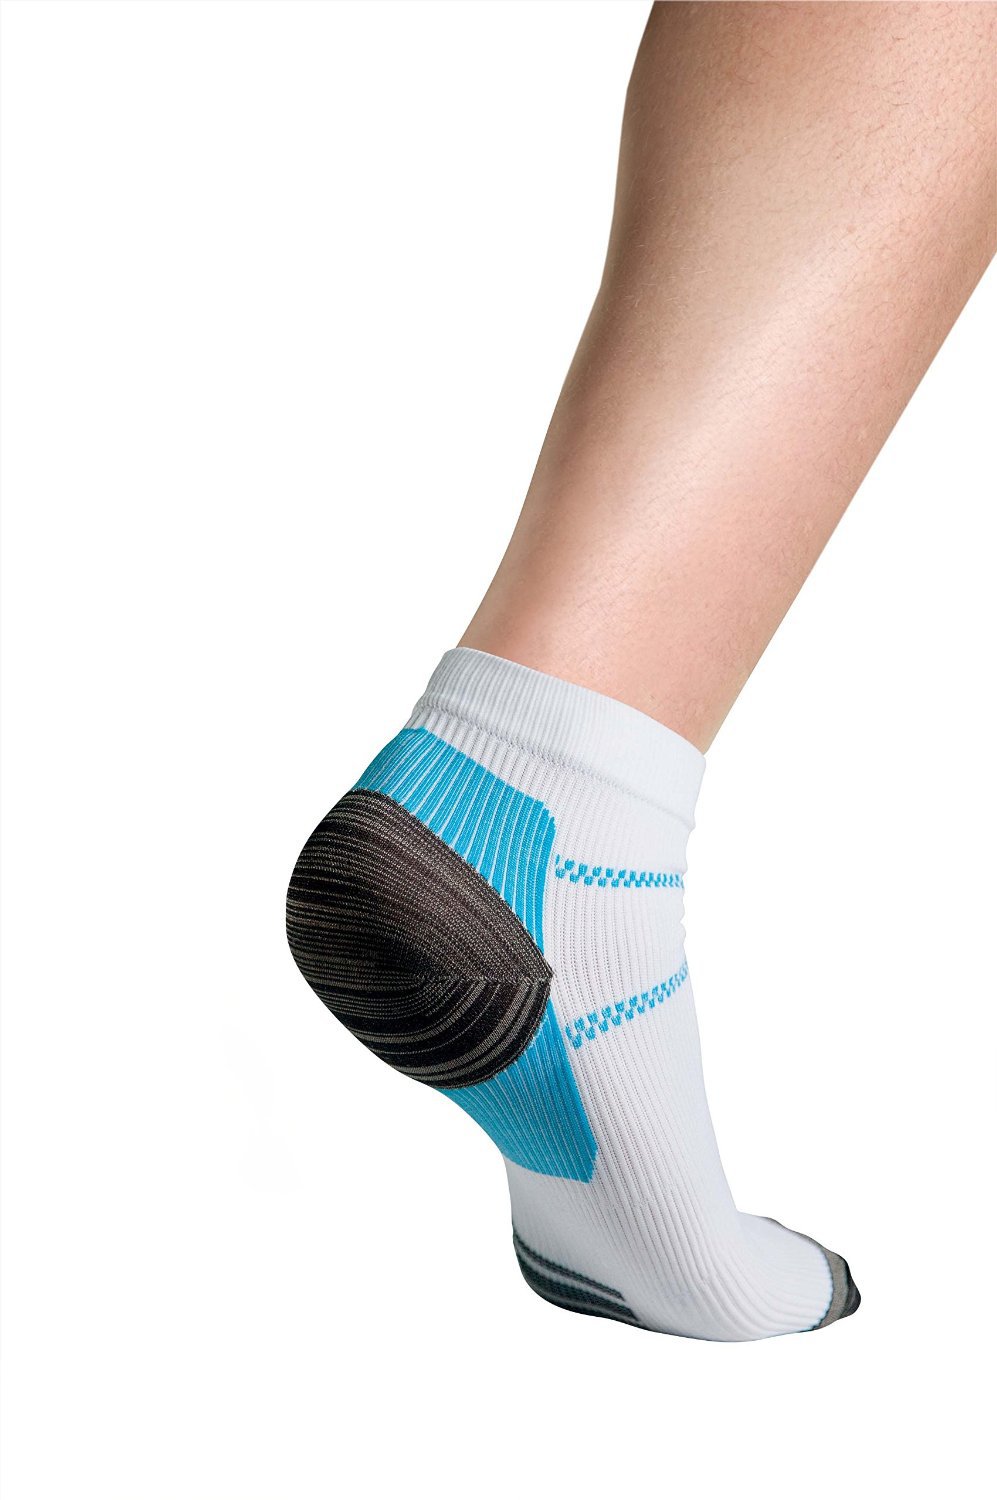 Ankle Compression Socks for Women and Men5